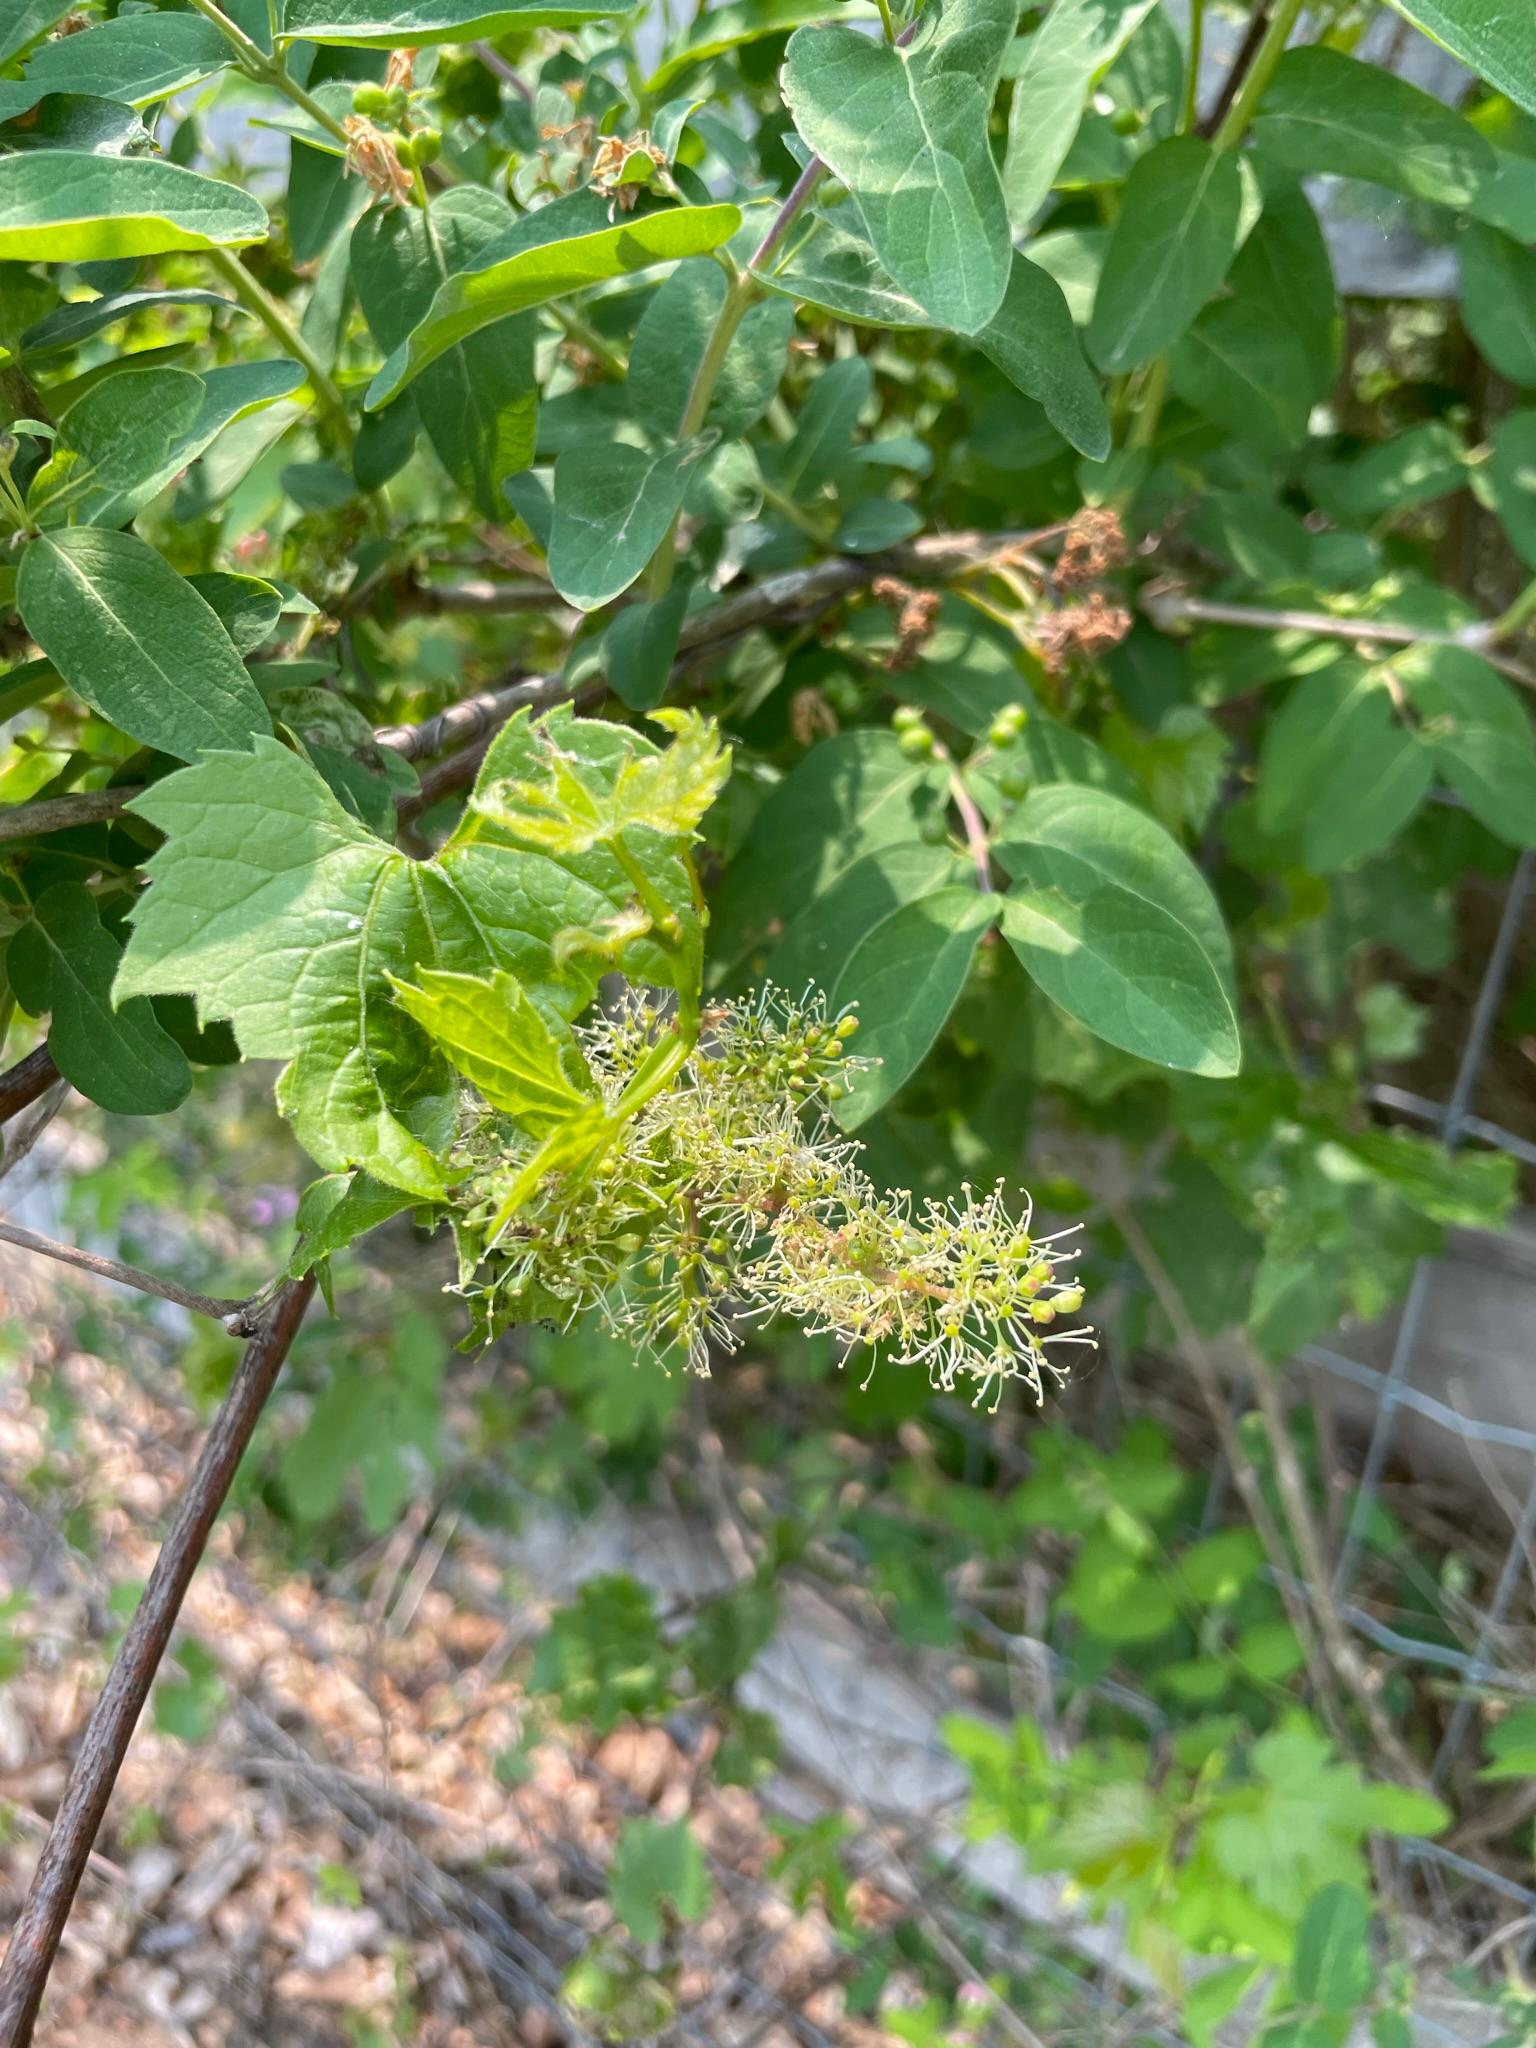 Wild grapes in bloom.